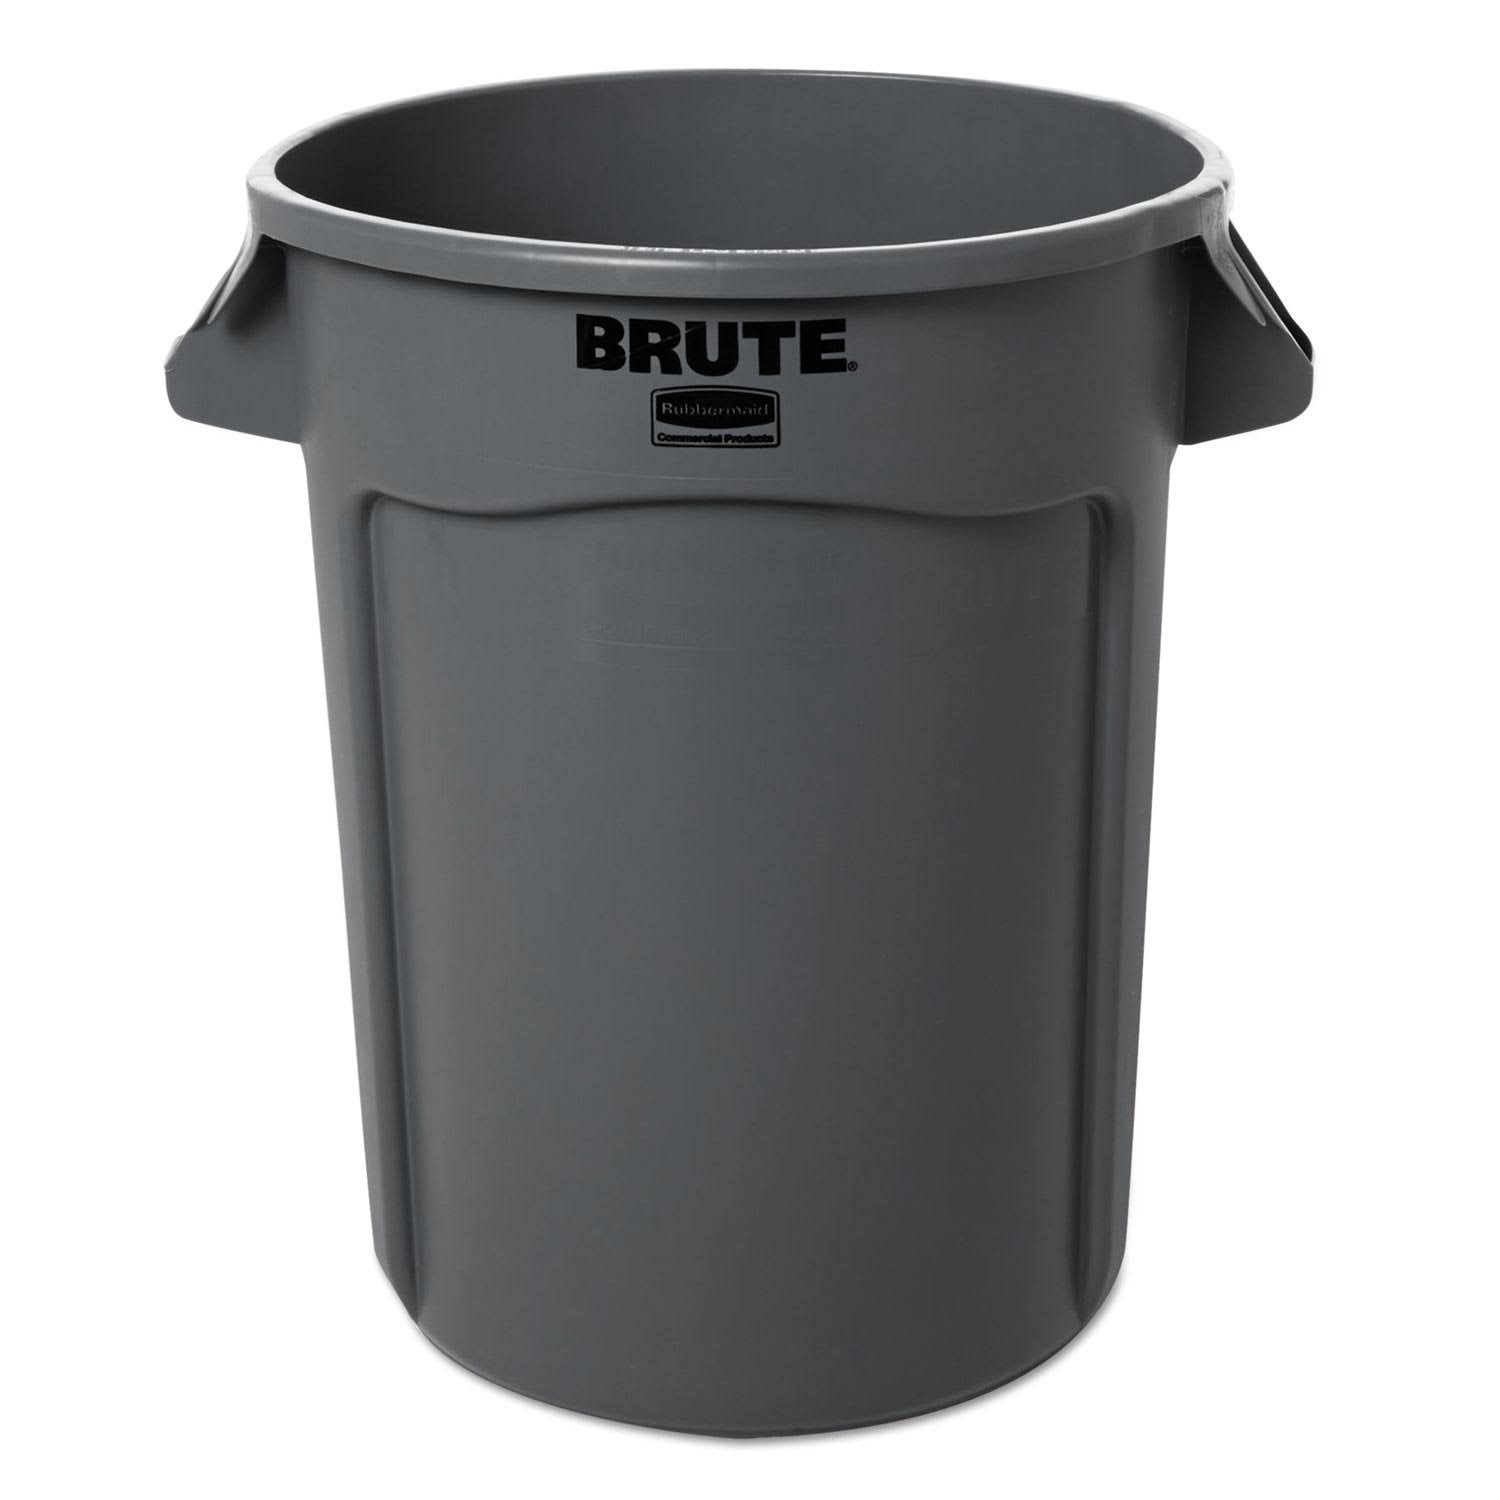 Rubbermaid Commercial Brute Round Container - 32gl, Gray